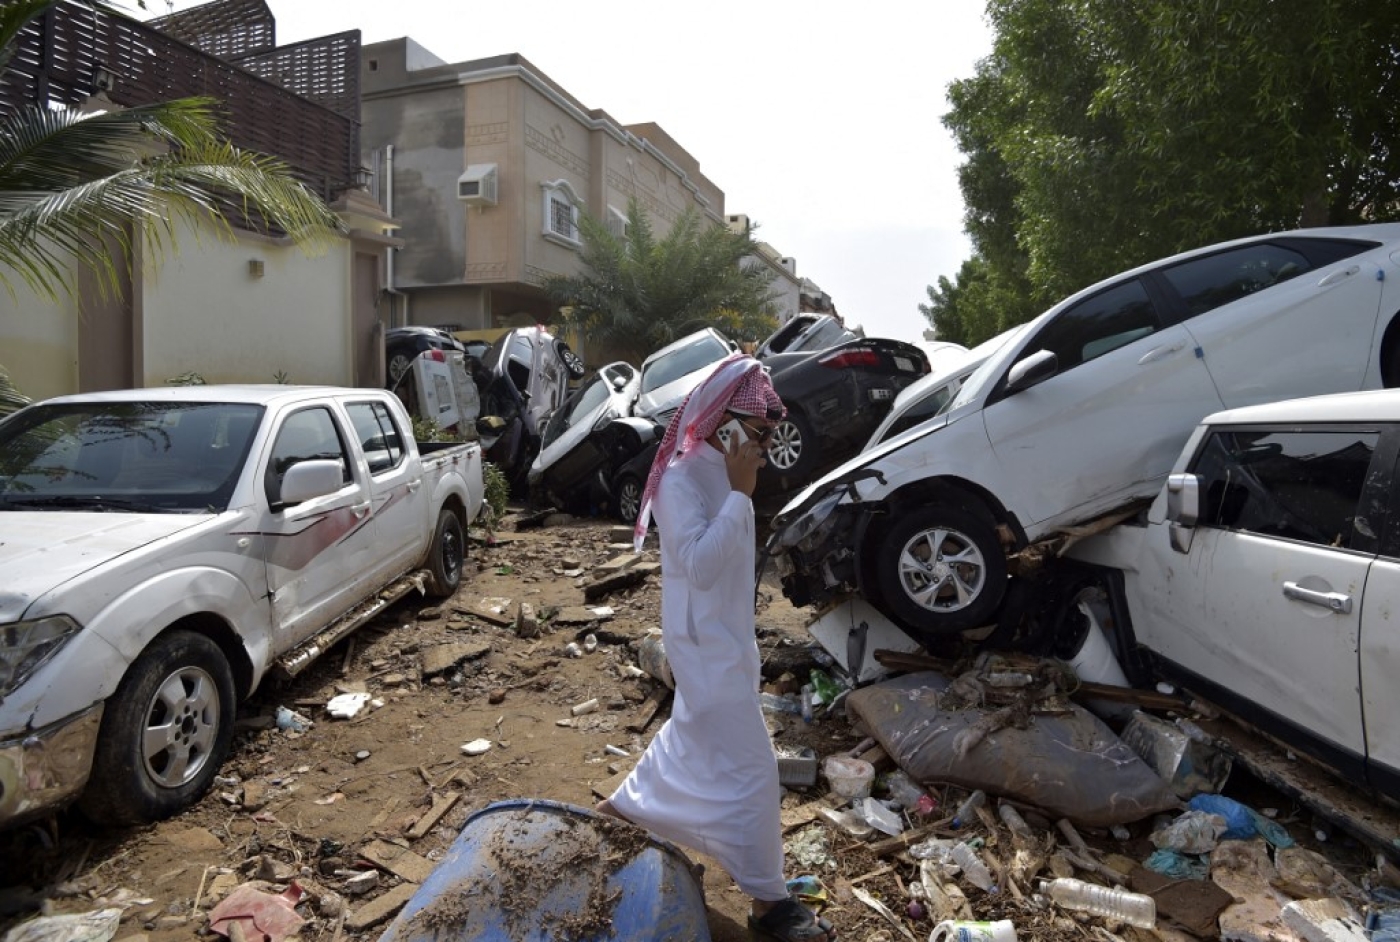 A man walks past cars piled up in a street after they were washed away by heavy rains in the Saudi coastal city of Jeddah on 25 November 2022 (AFP)